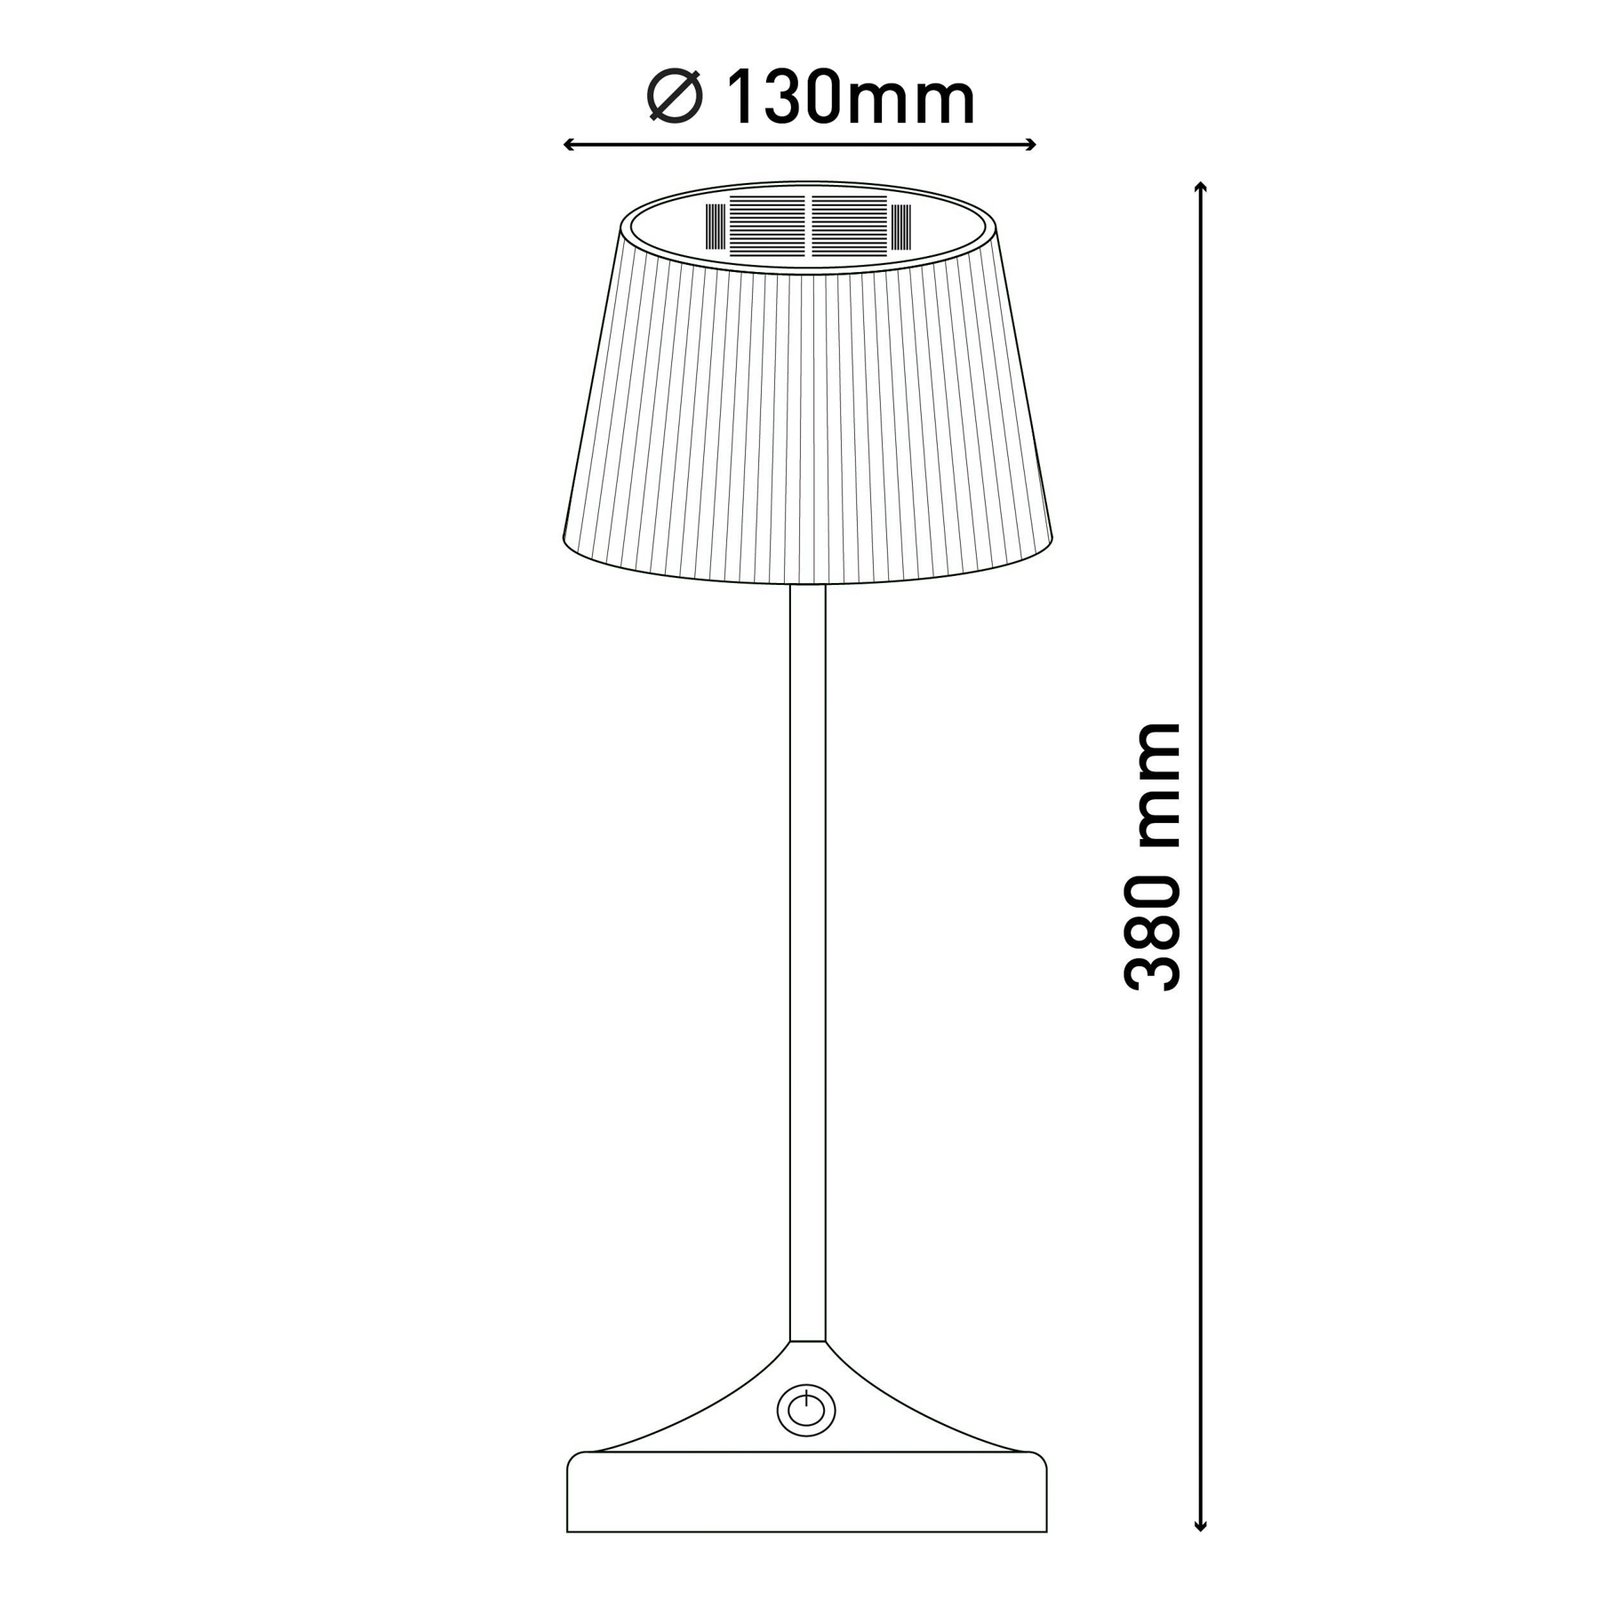 Lampe table solaire LED Emmi CCT recharge, blanche